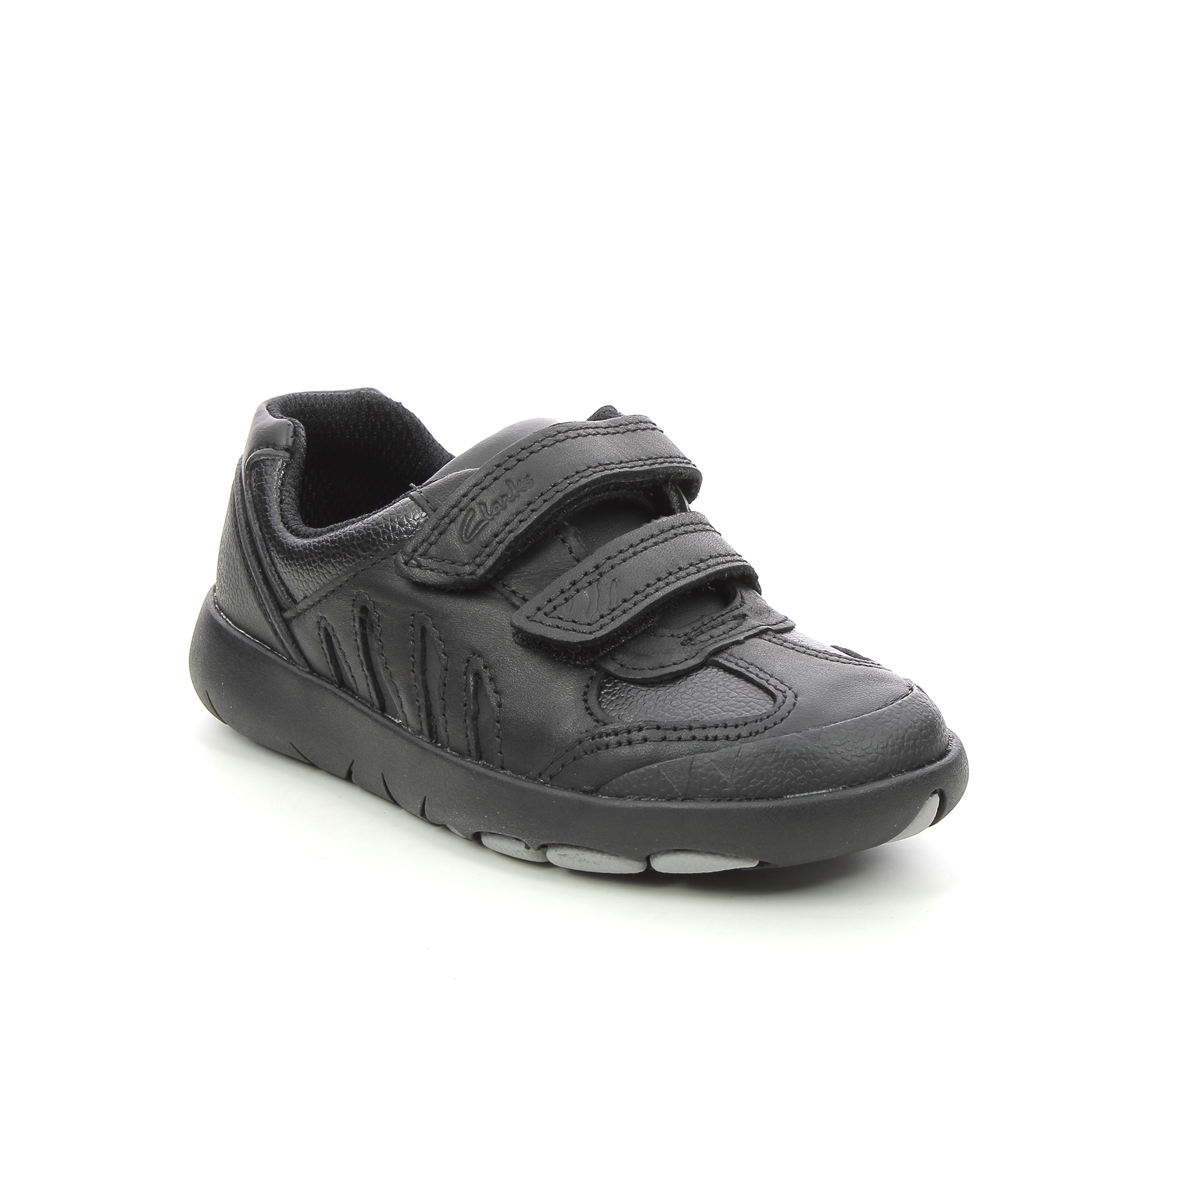 Clarks Rex Stride T Black Leather Kids Boys Casual Shoes 614397G In Size 8 In Plain Black Leather G Width Fitting For School For kids